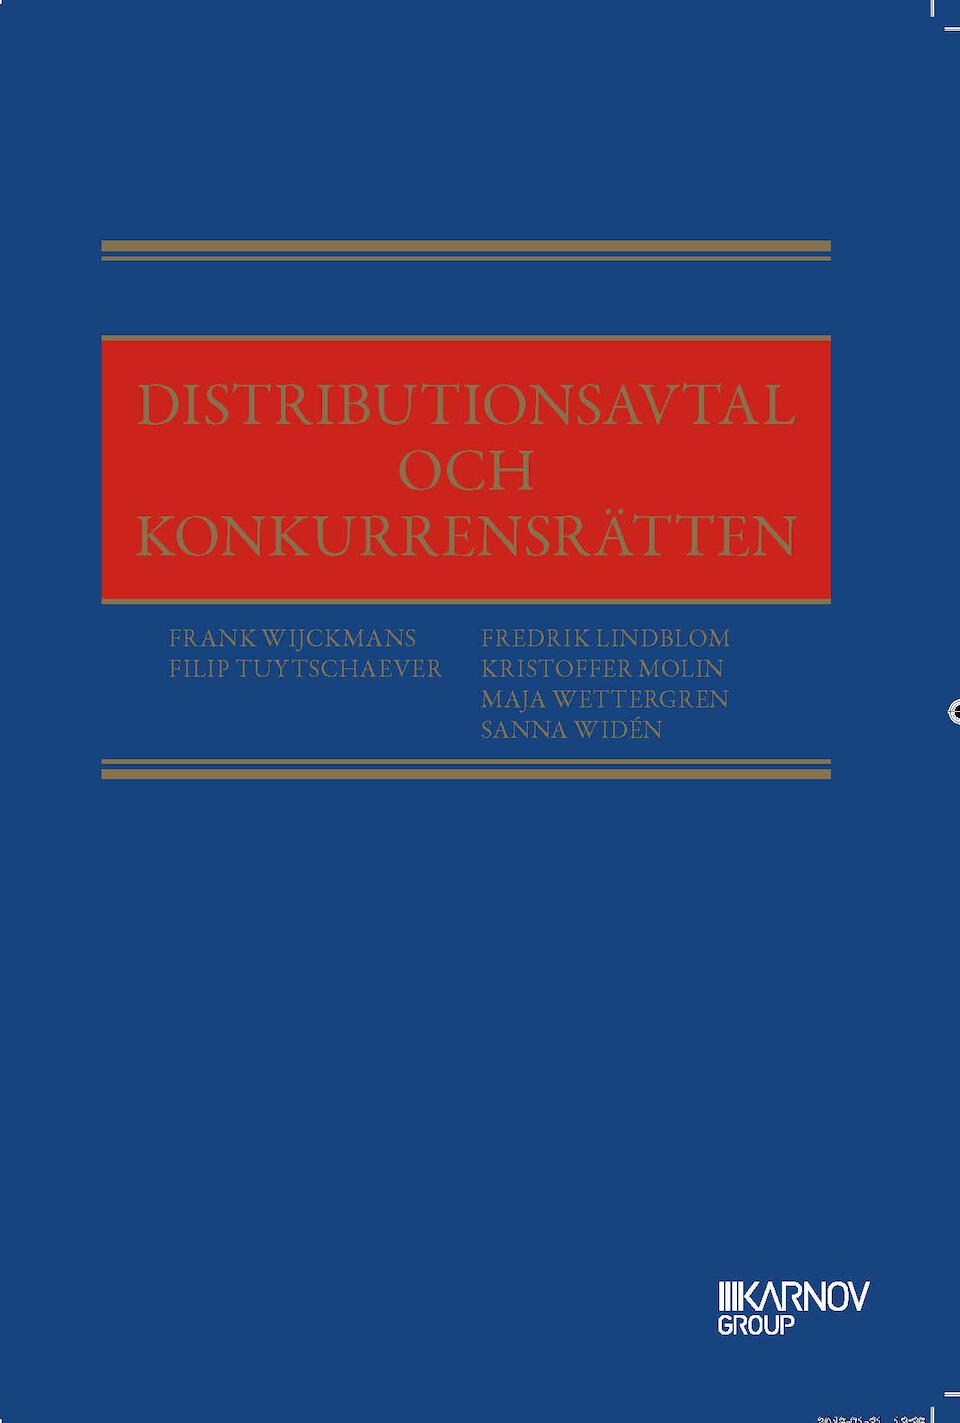 Distribution agreements and competition law